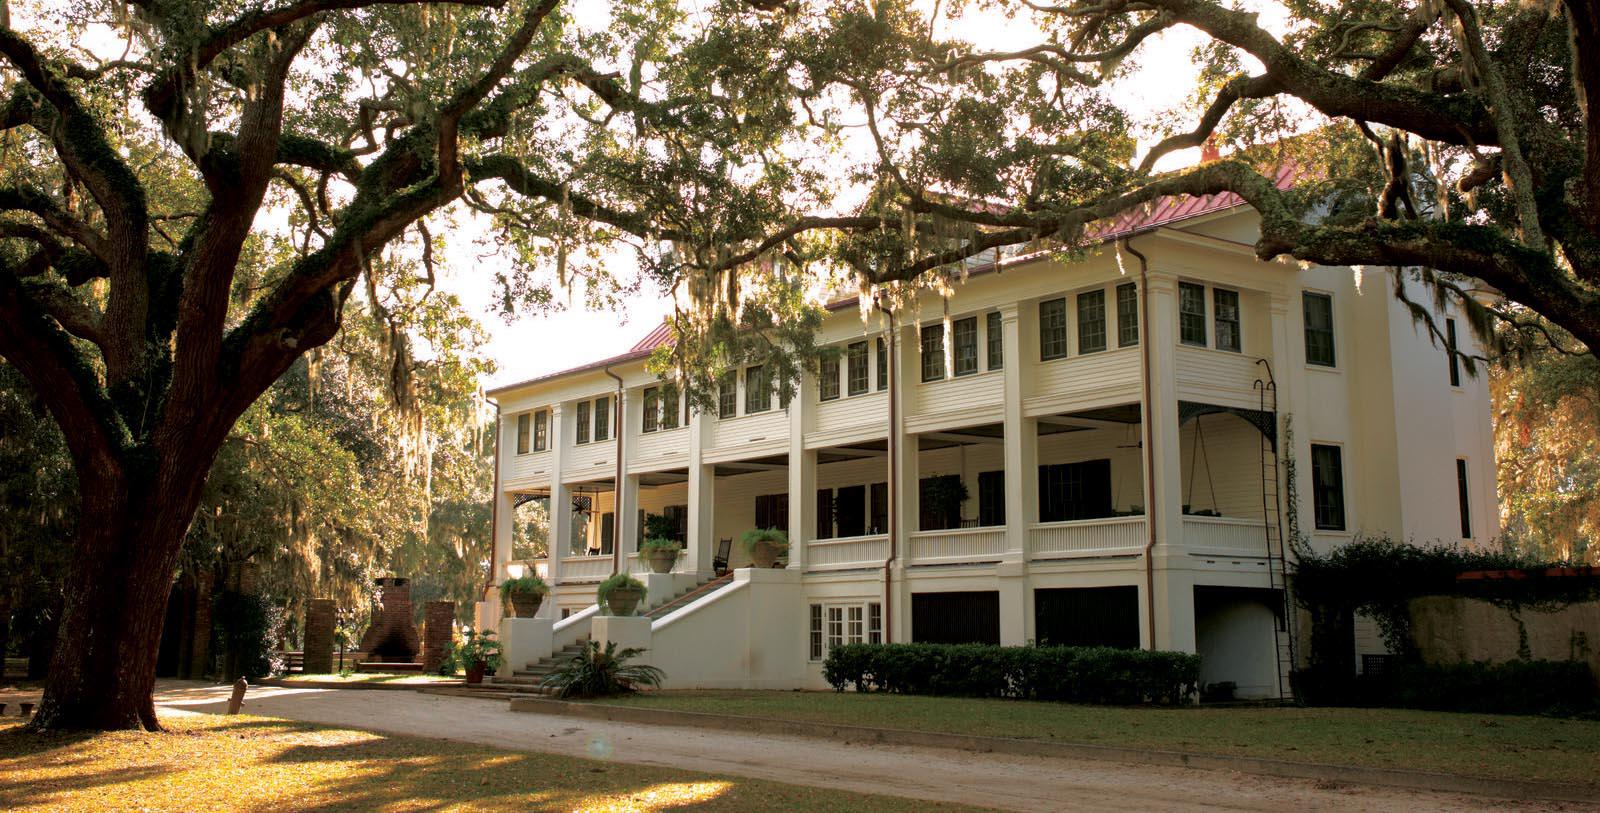 Image of exterior and entrance of the Greyfield Inn in Cumberland Island, Georgia.